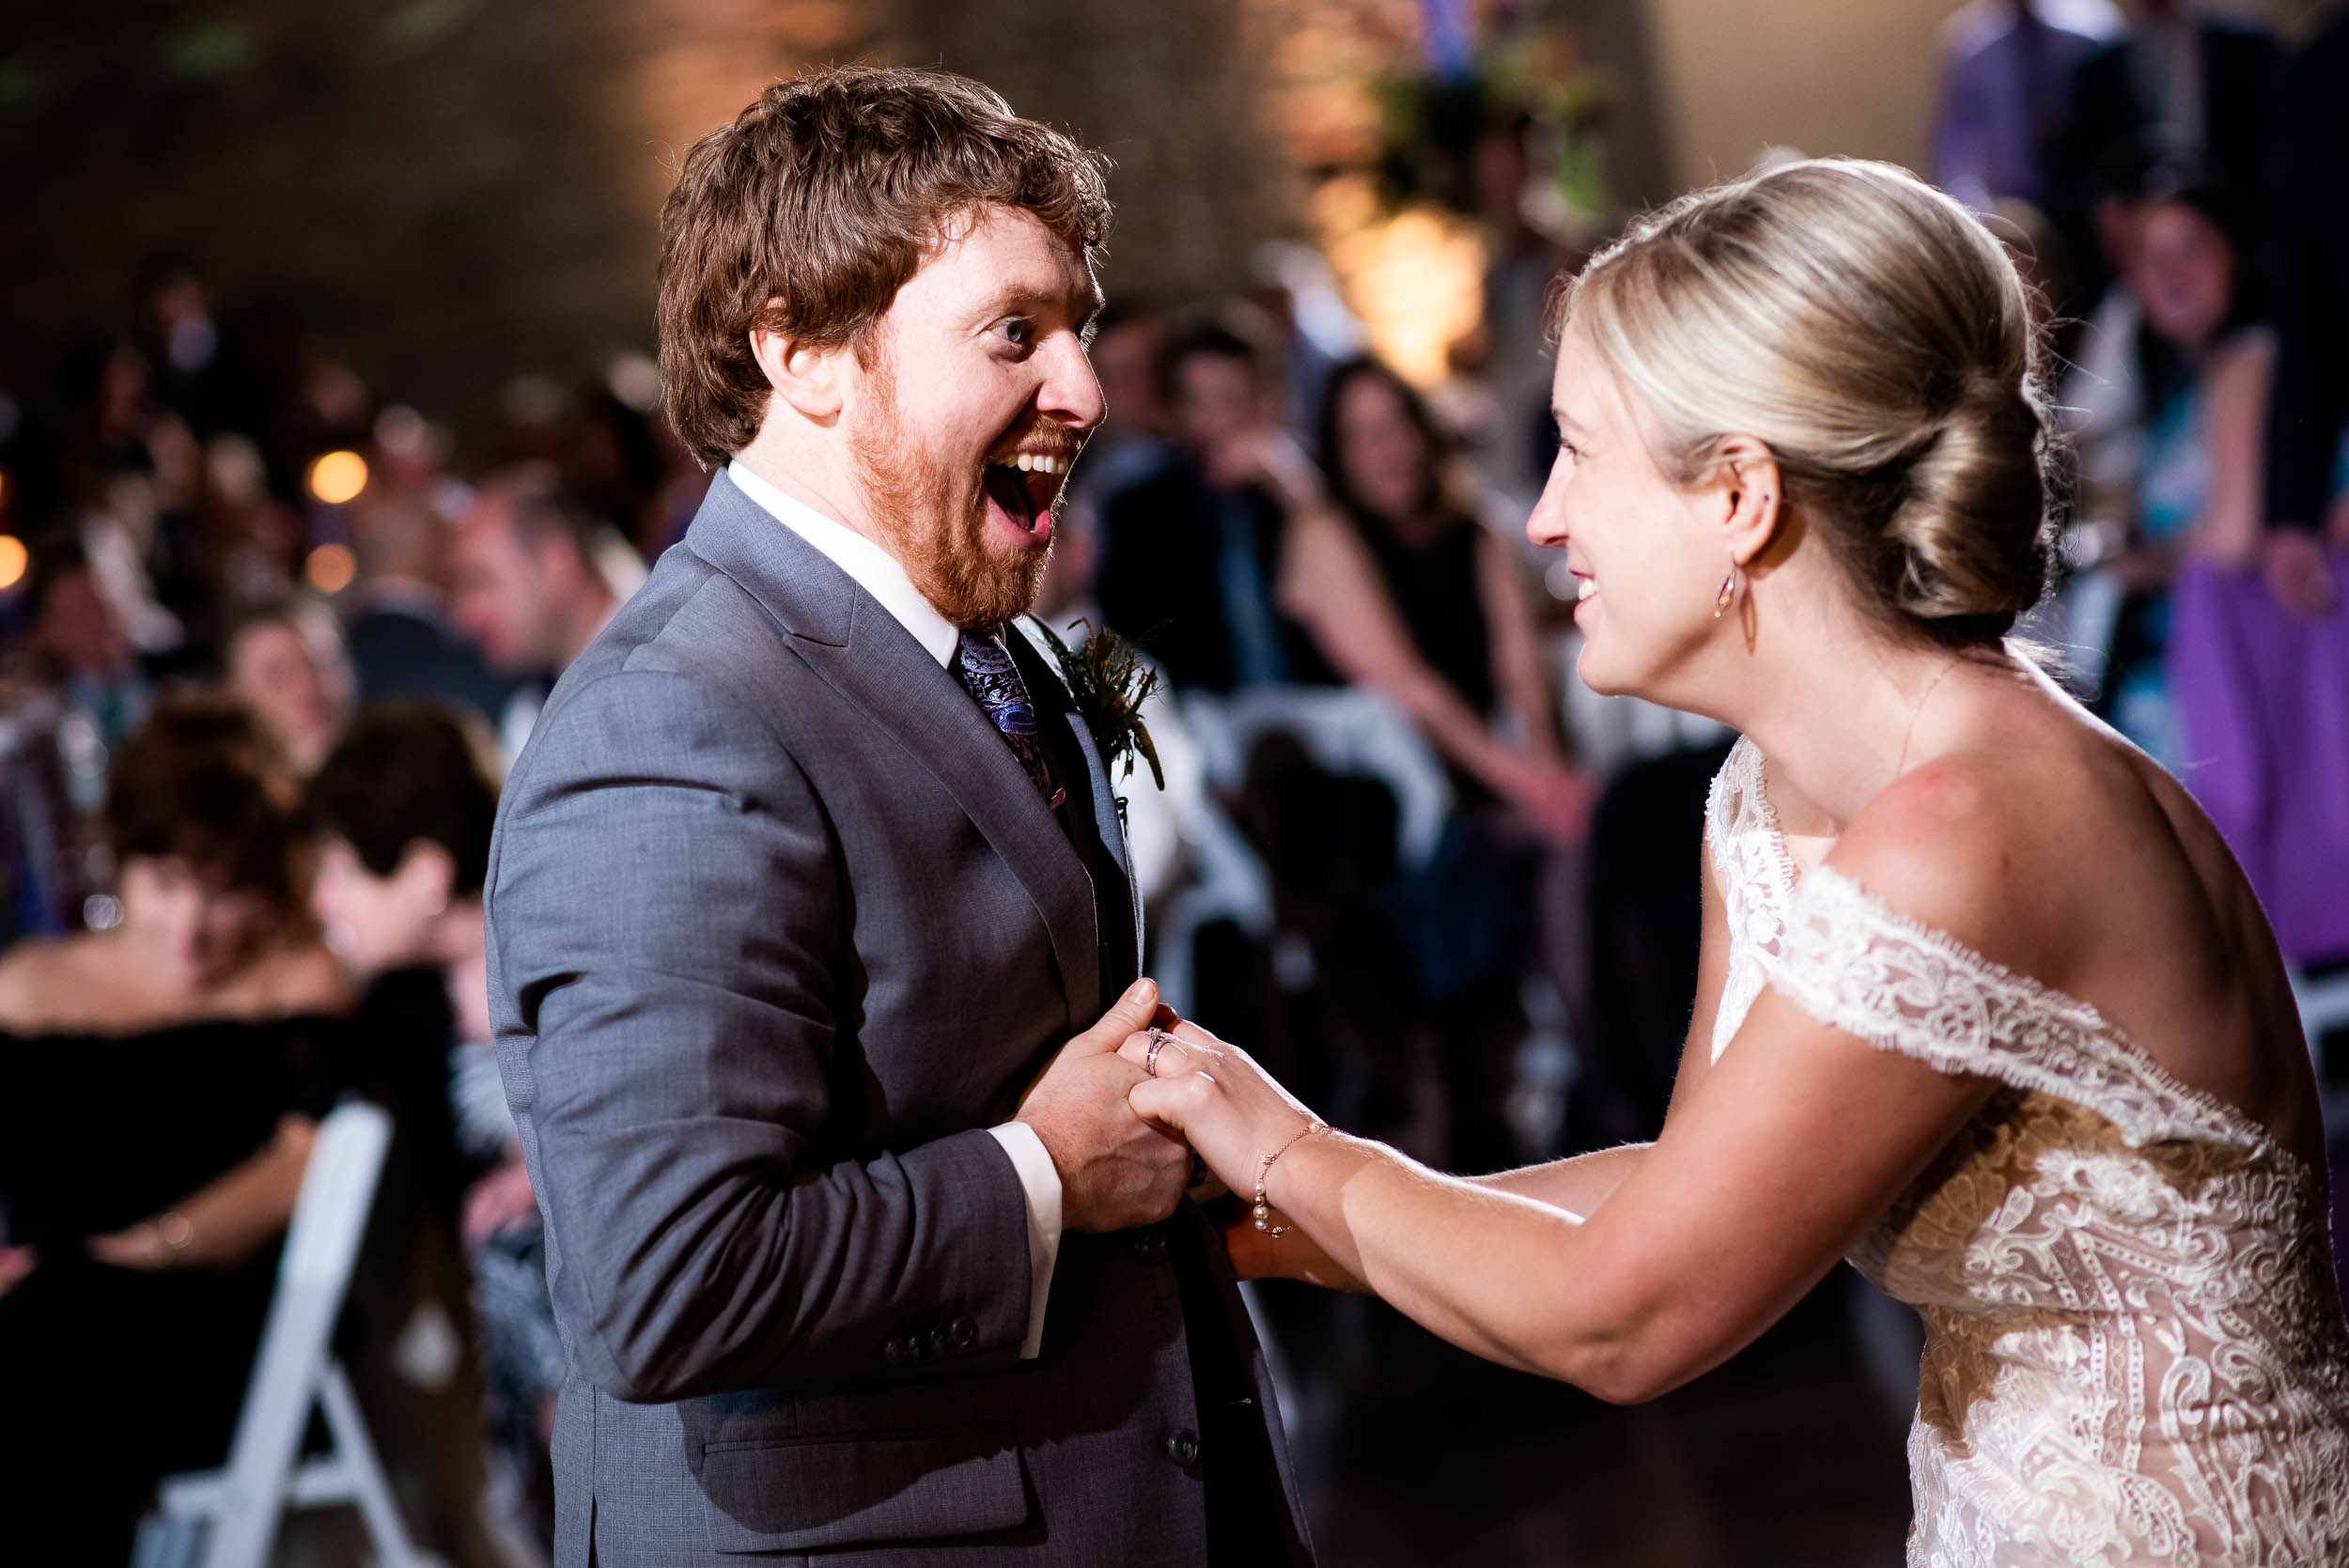 Fun wedding photos: Modern industrial Chicago wedding inside Prairie Street Brewhouse captured by J. Brown Photography. Find more wedding ideas at jbrownphotography.com!